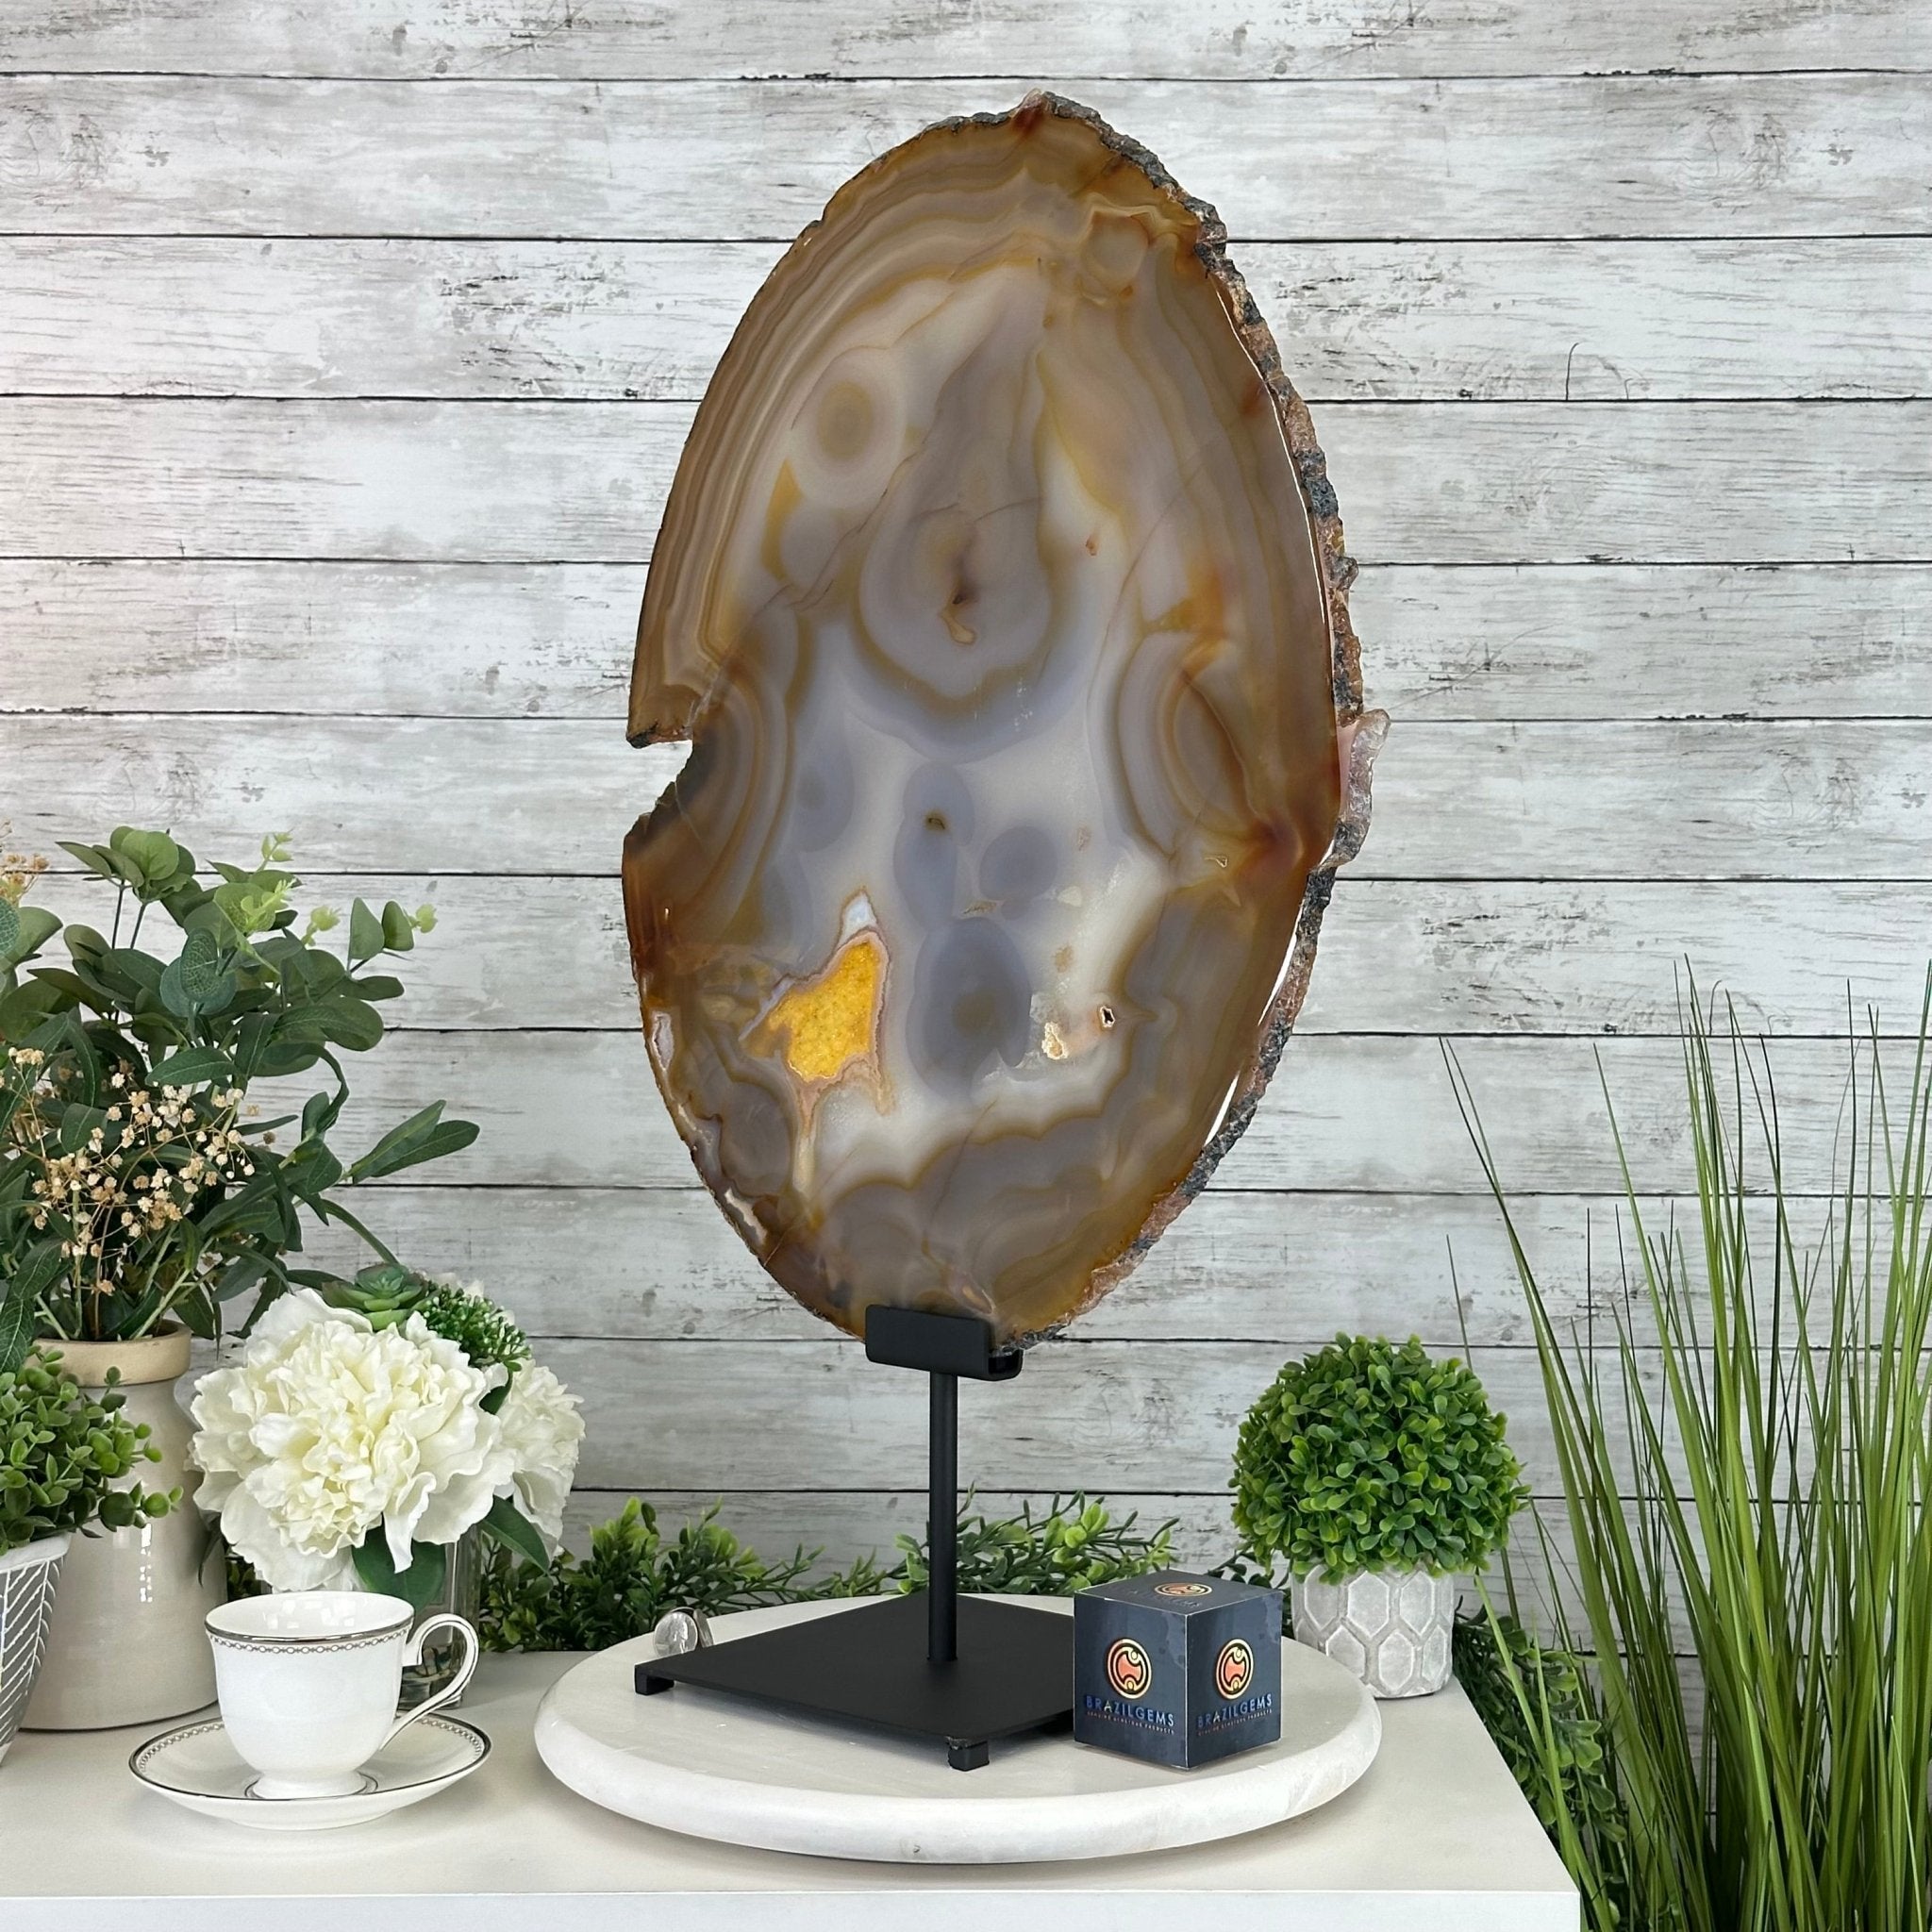 Special Large Natural Brazilian Agate Slice on a Metal Stand, 28.5" Tall #5056-0044 - Brazil GemsBrazil GemsSpecial Large Natural Brazilian Agate Slice on a Metal Stand, 28.5" Tall #5056-0044Slices on Fixed Bases5056-0044